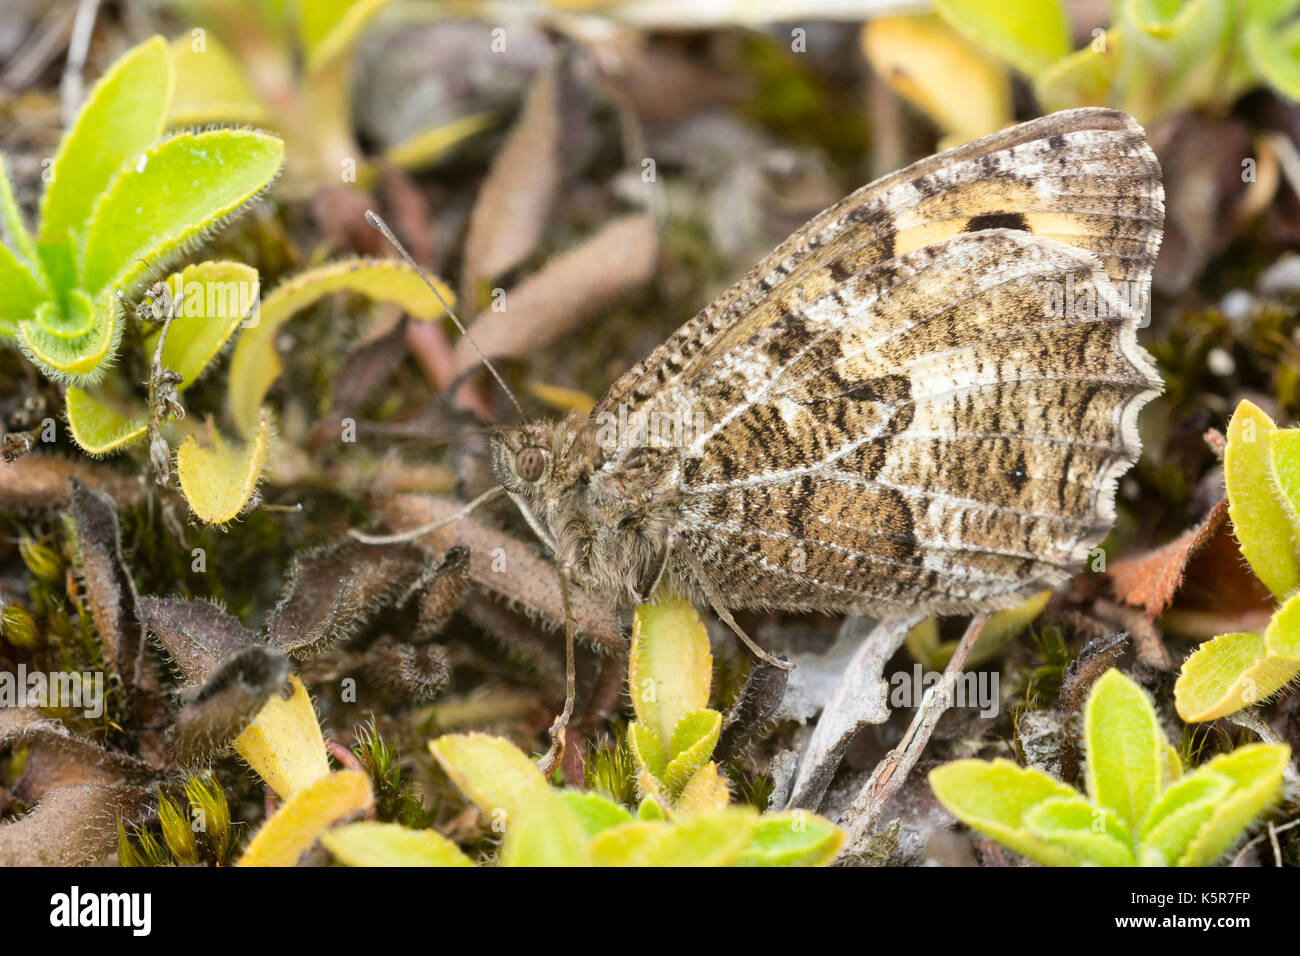 Hipparchia semele, the grayling butterfly at rest and camouflaged among heathland vegetation Stock Photo